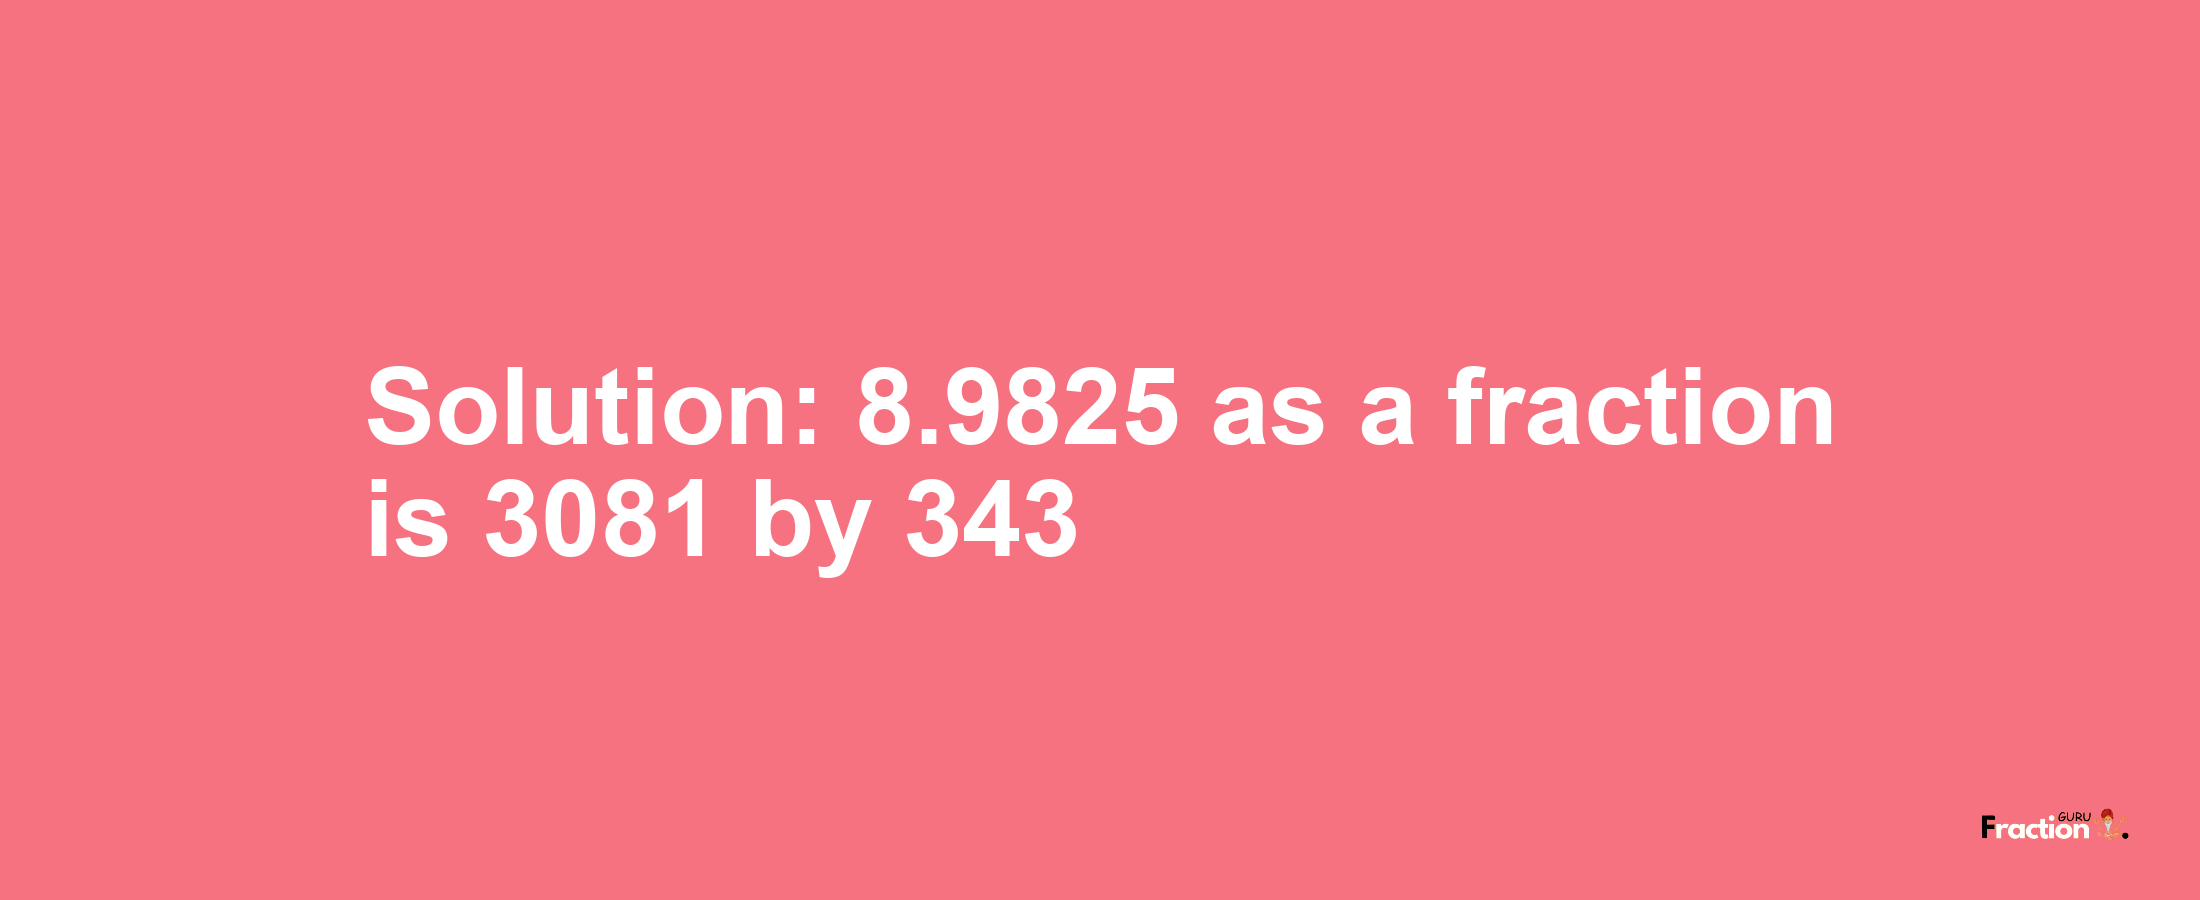 Solution:8.9825 as a fraction is 3081/343